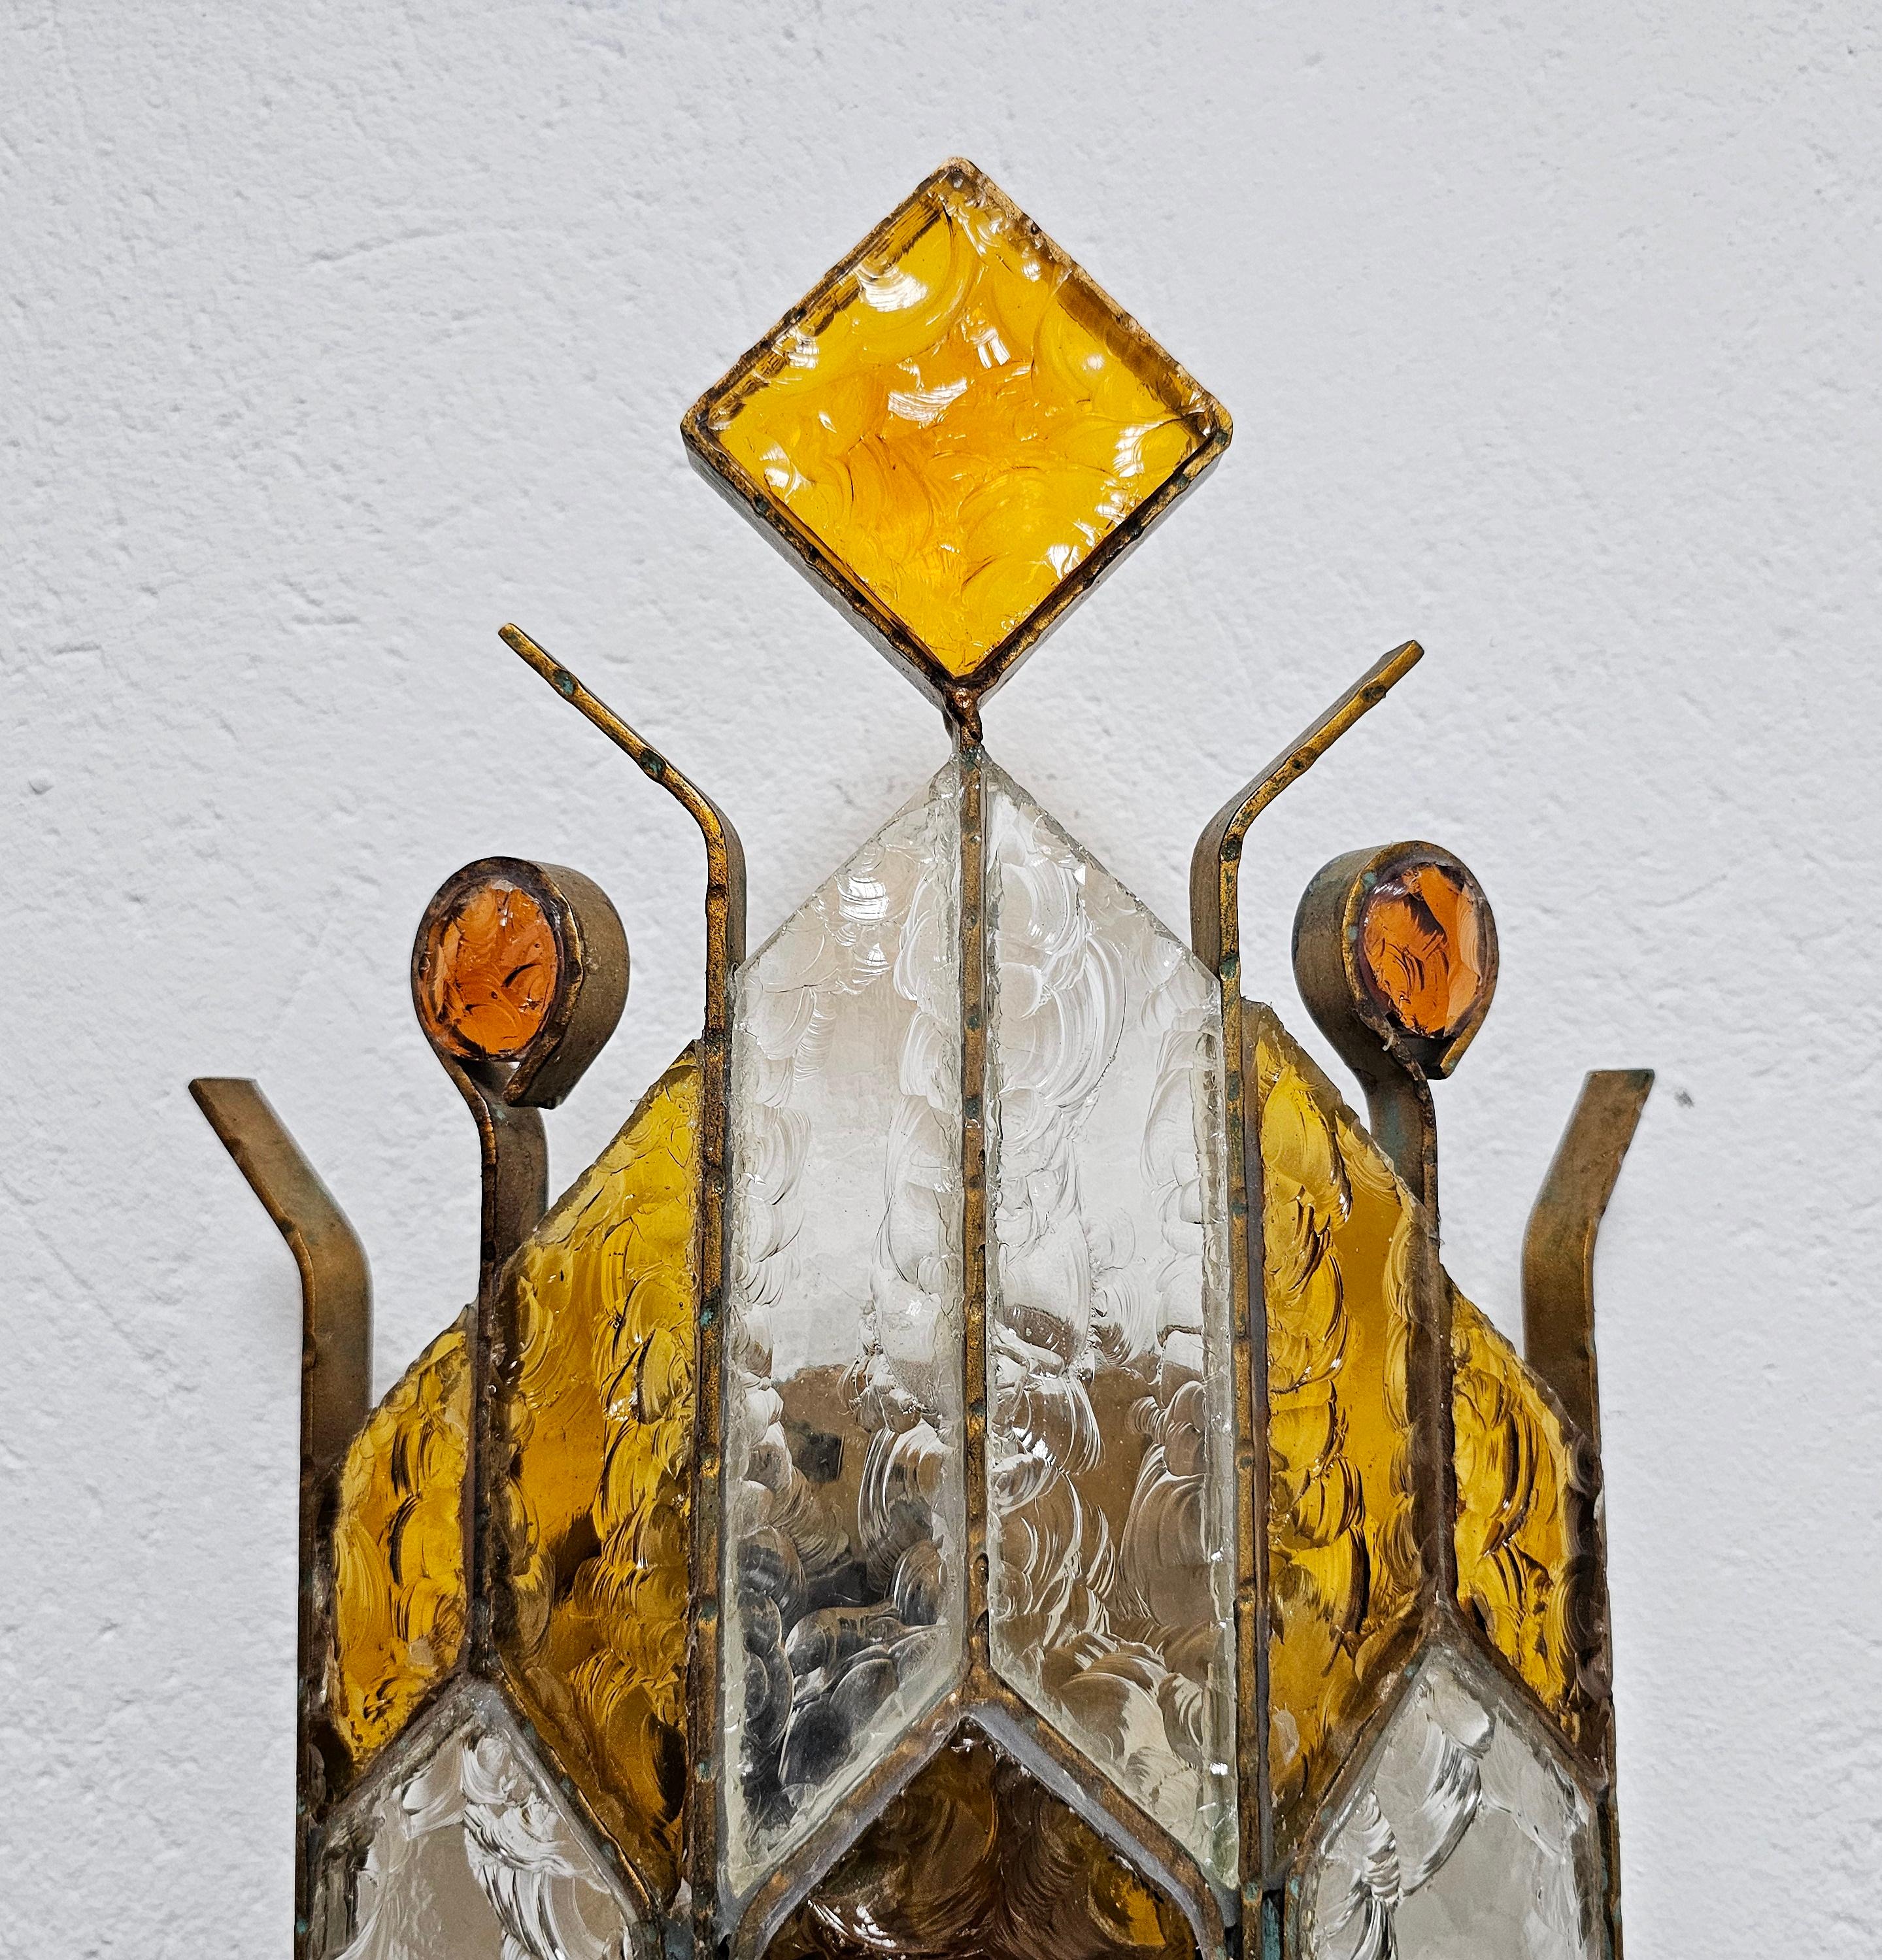 Brass Brutalist Sconce in hammered glass by Biancardi and Jordan Arte, Italy 1970s For Sale